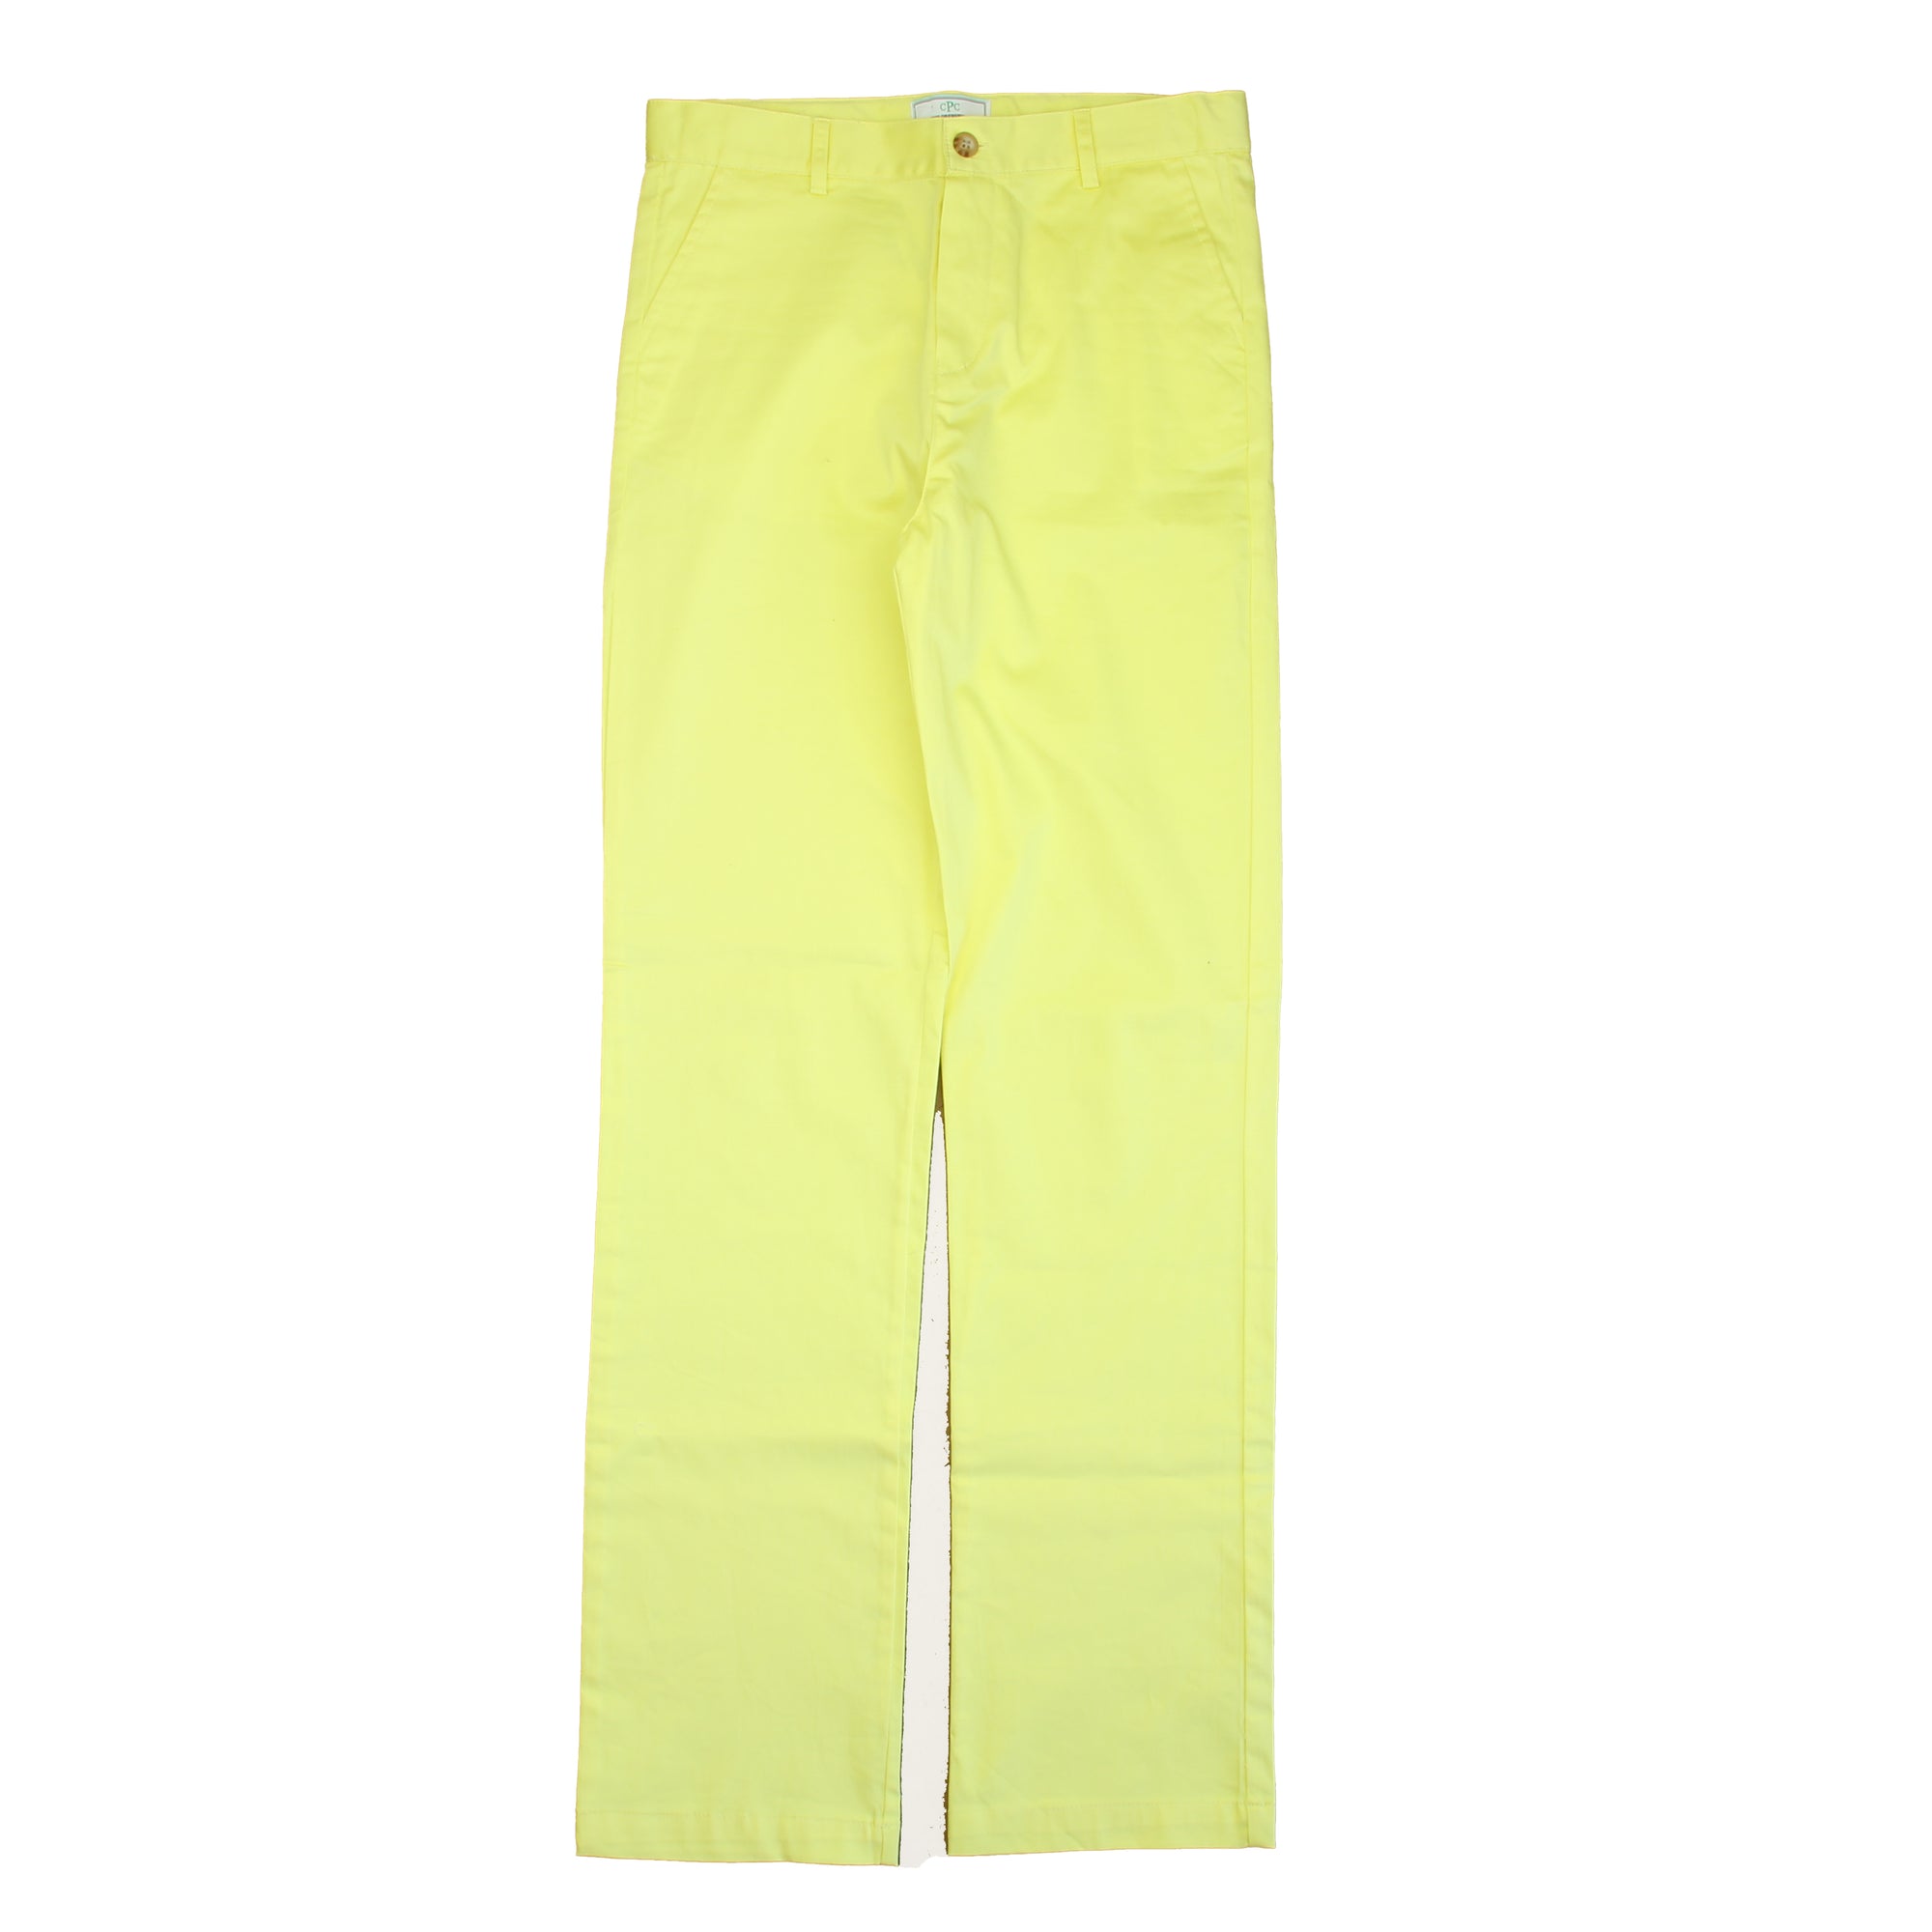 Limelight Yellow / 5T